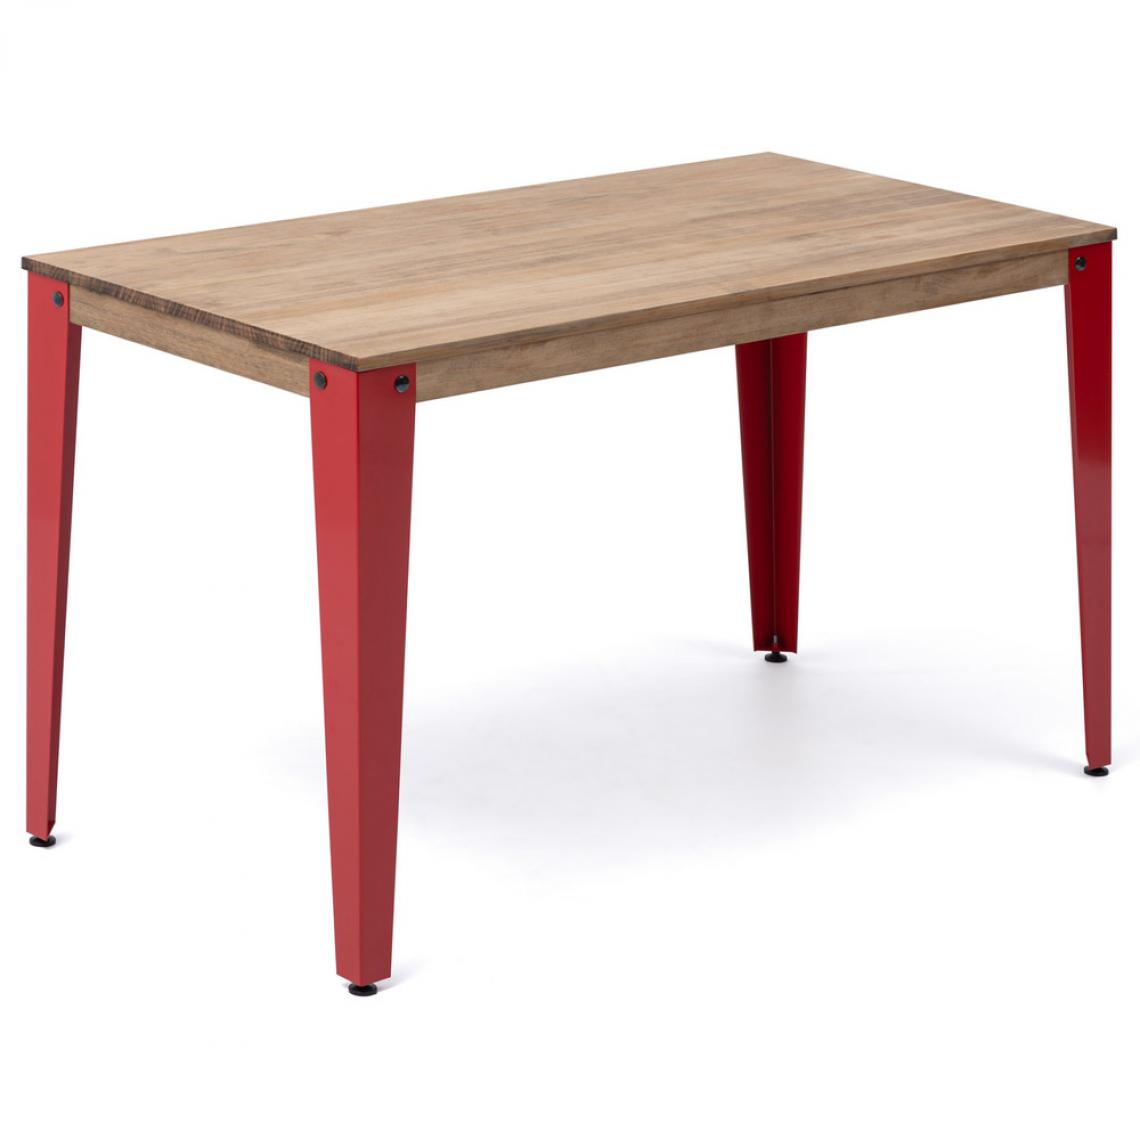 BOX FURNITURE - Table Salle a Manger Lunds 160x80x75cm Rouge-Vieilli Box Furniture - Tables à manger